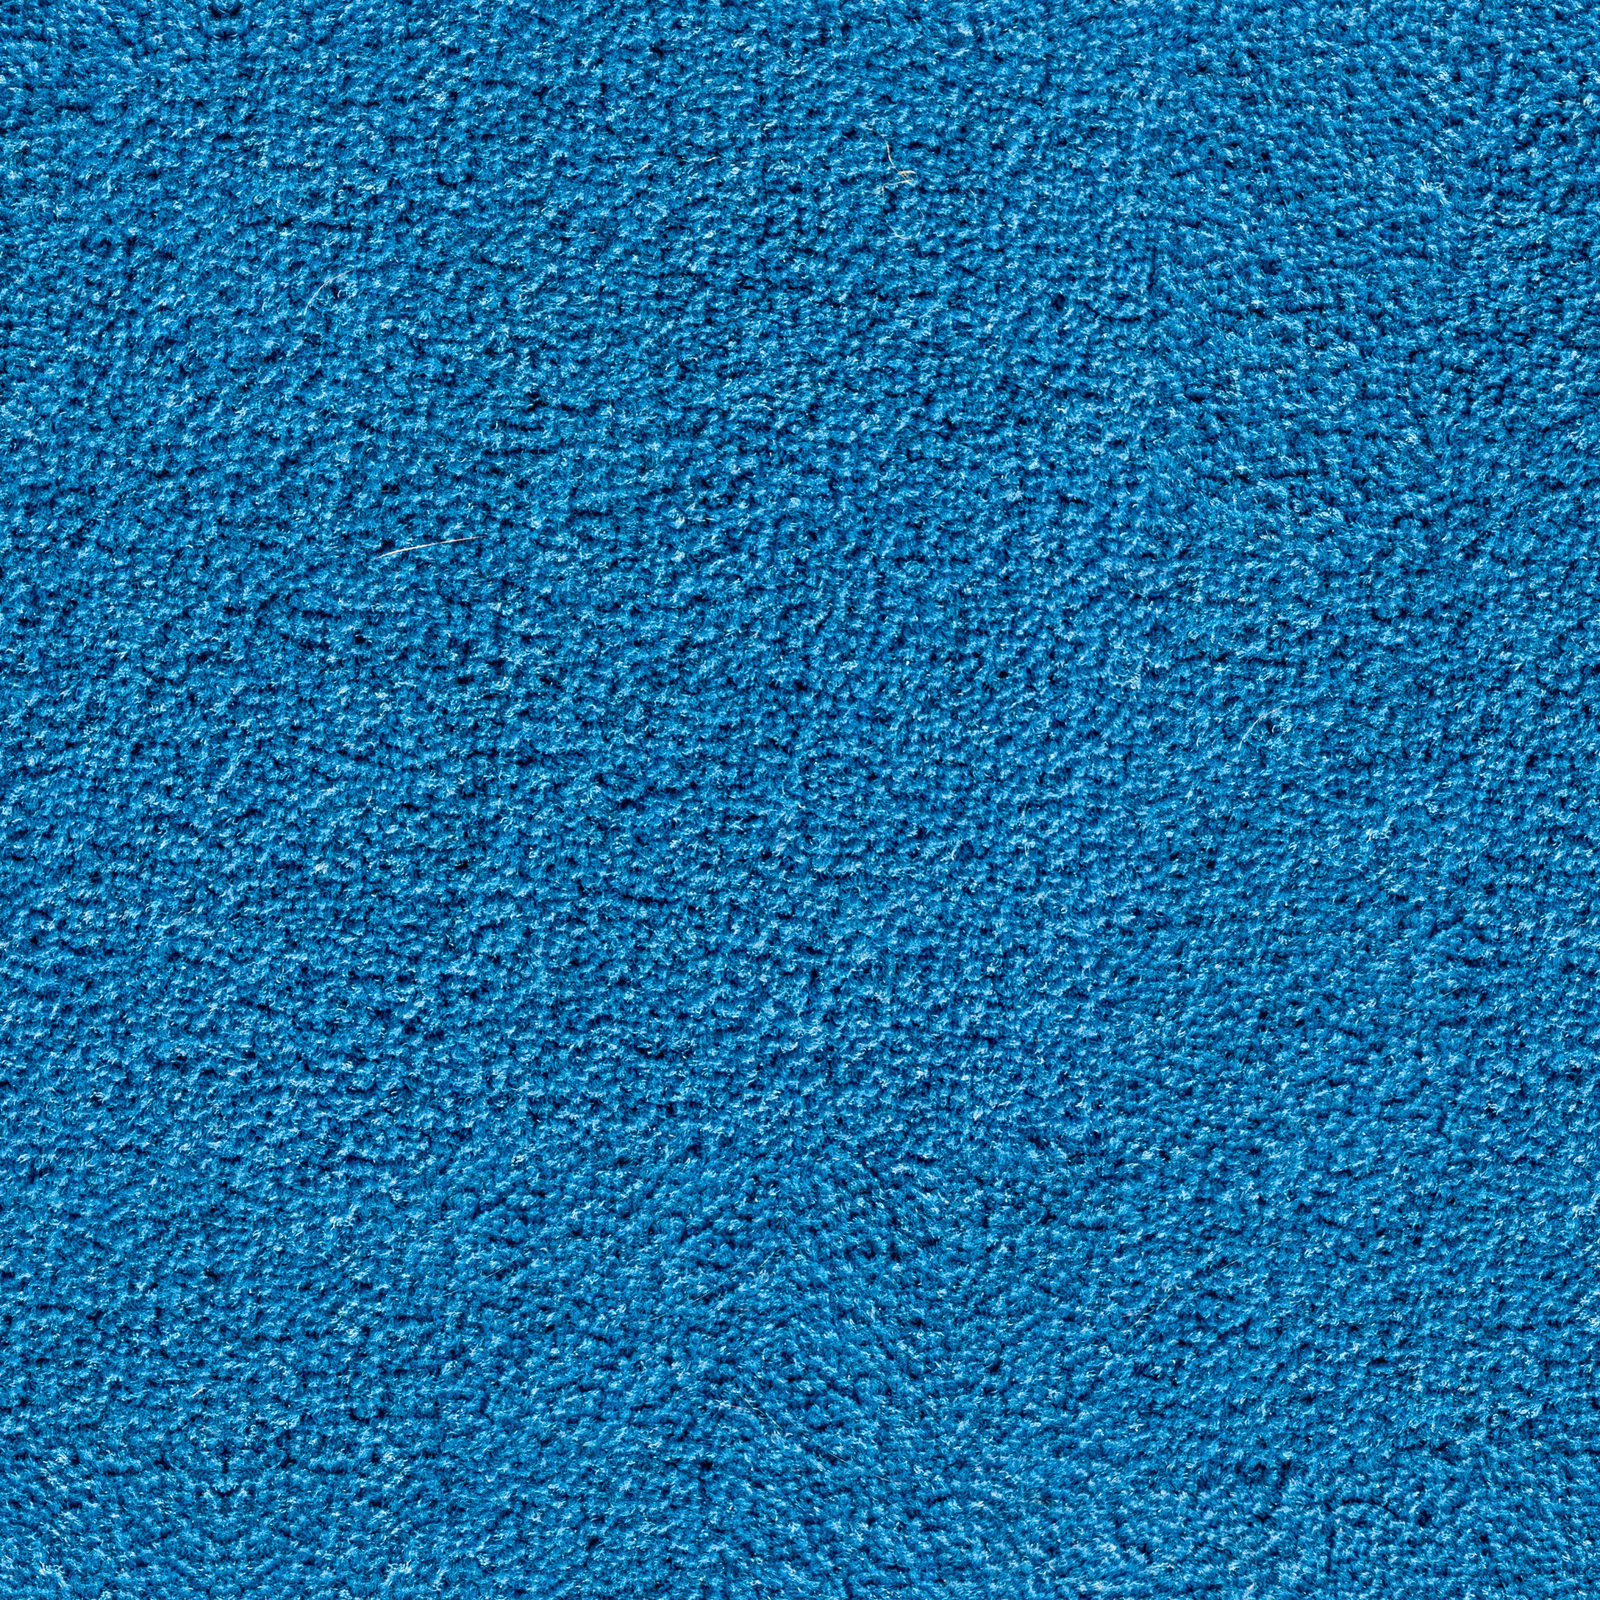 FREE 15+ Blue Carpet Texture Designs in PSD | Vector EPS